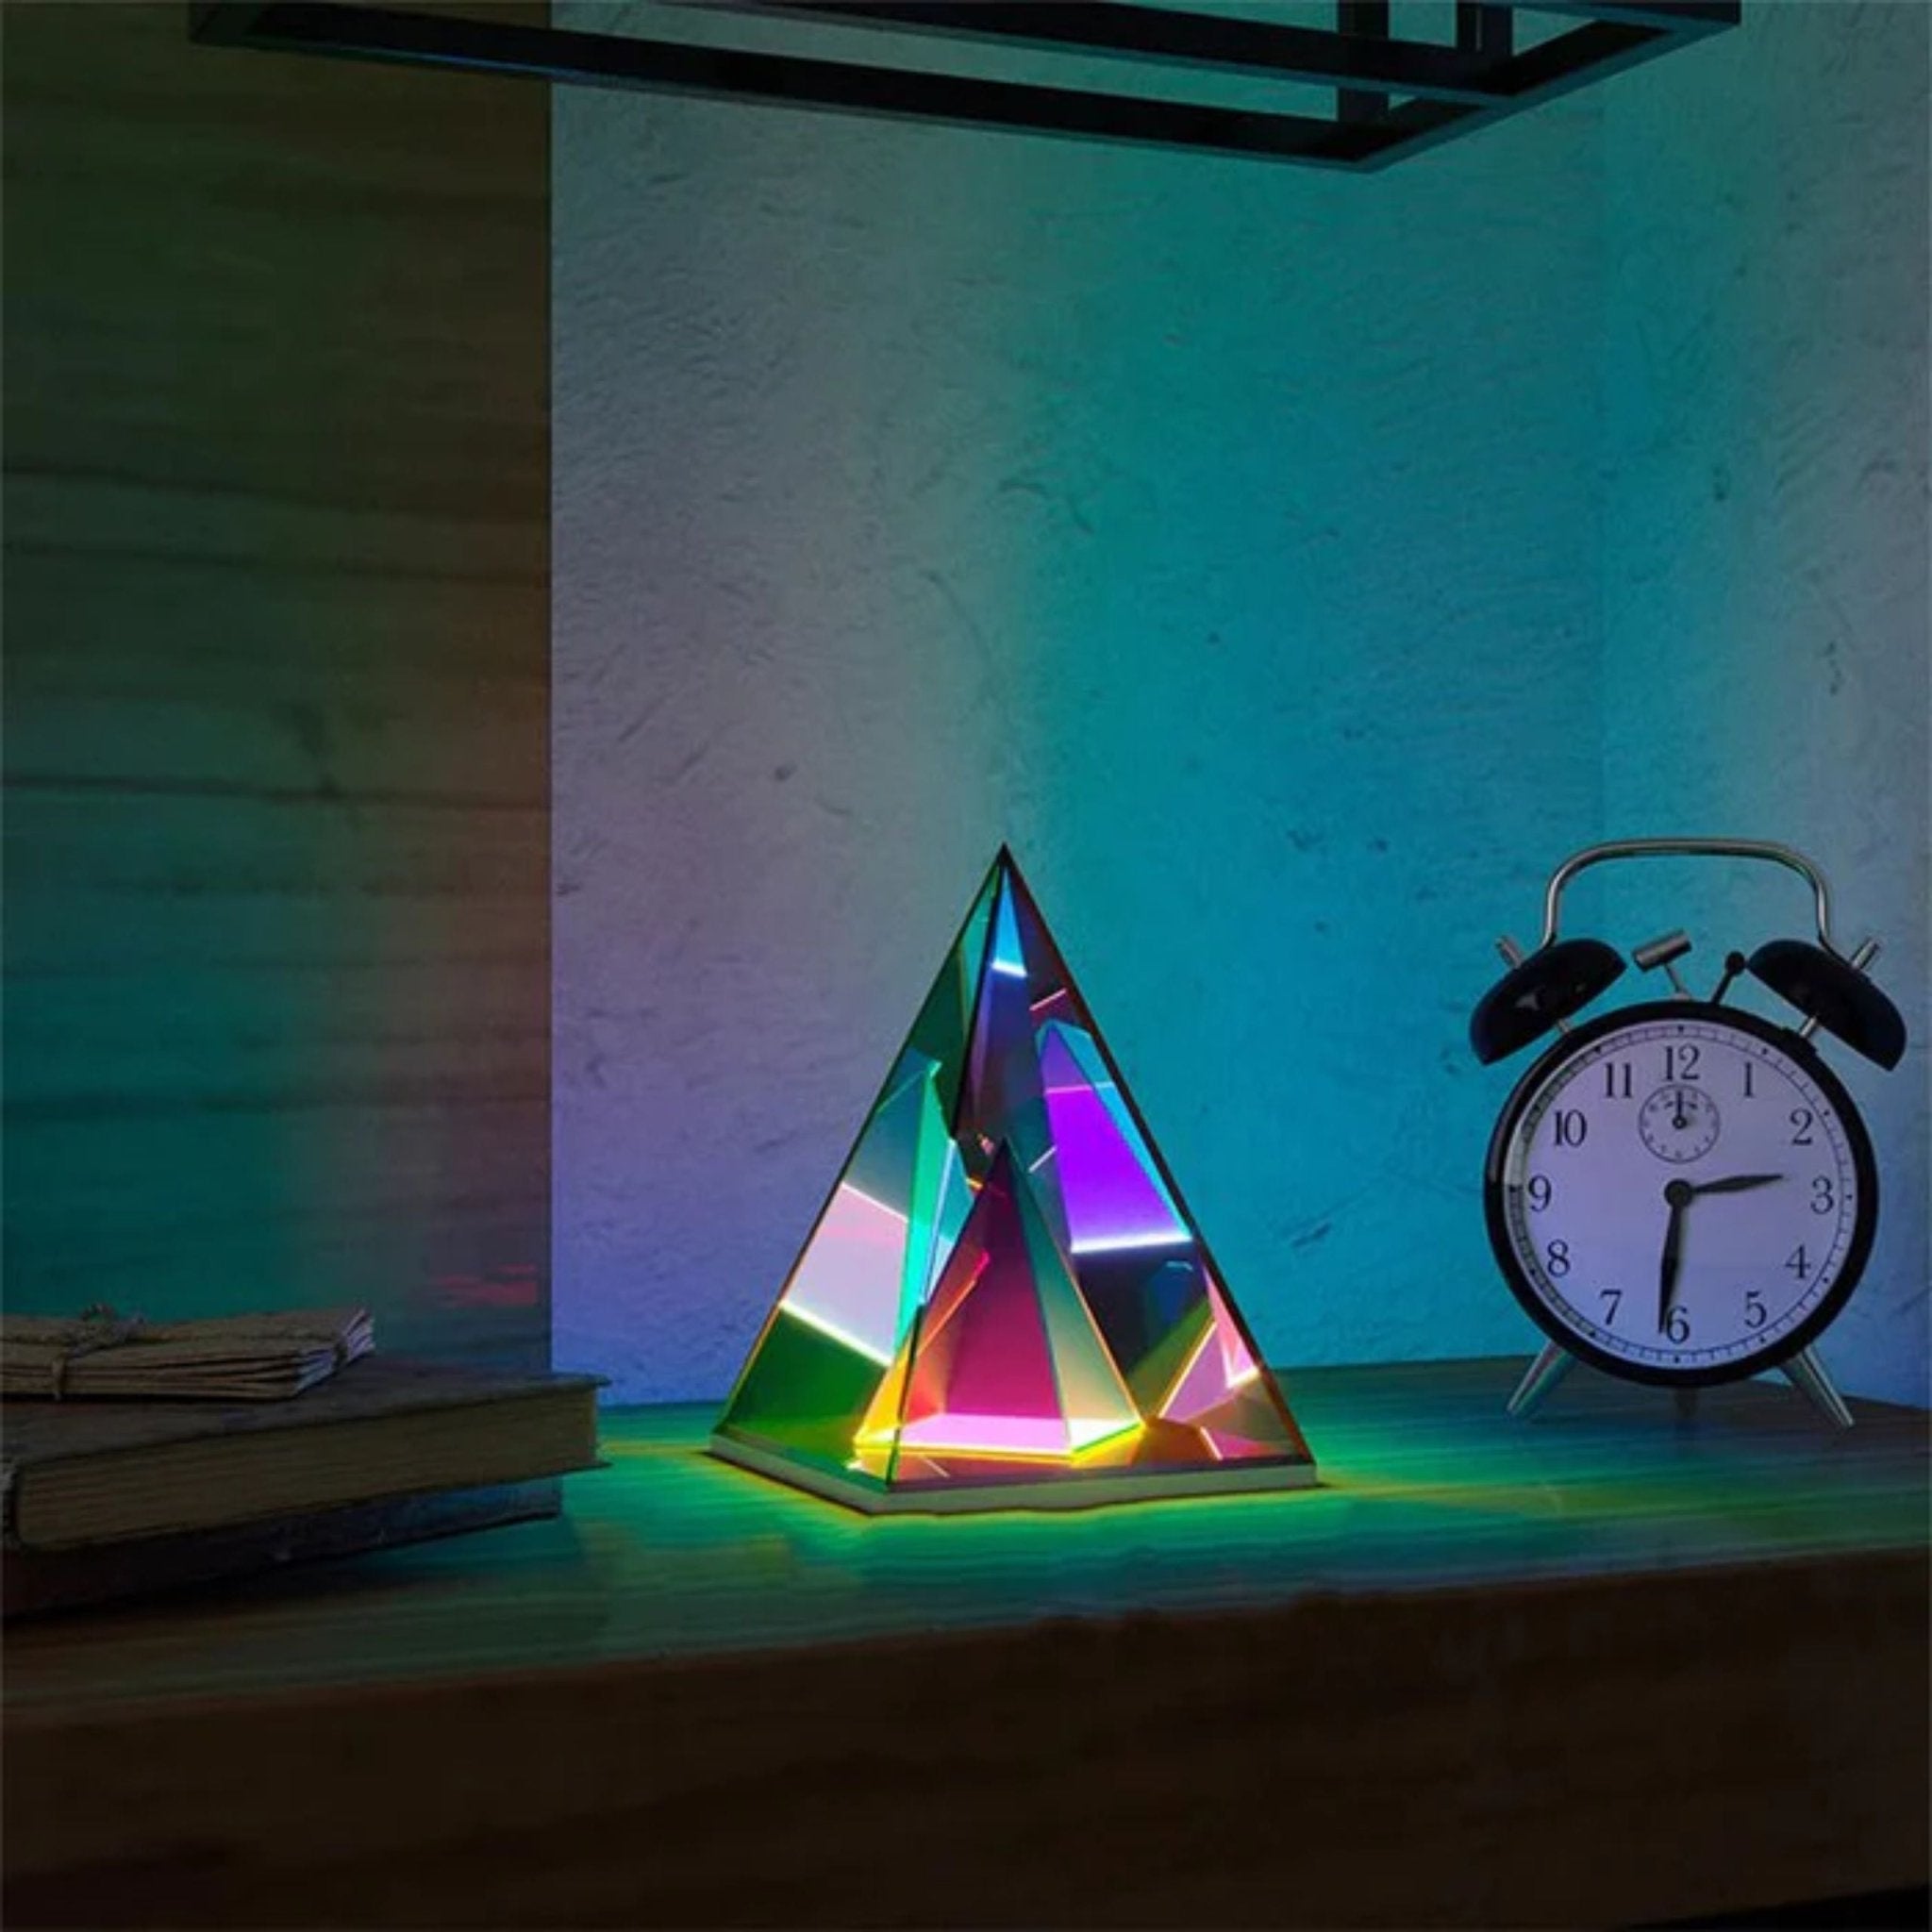 Magic Pyramid Led Colorful Table Light For Bedroom - Small